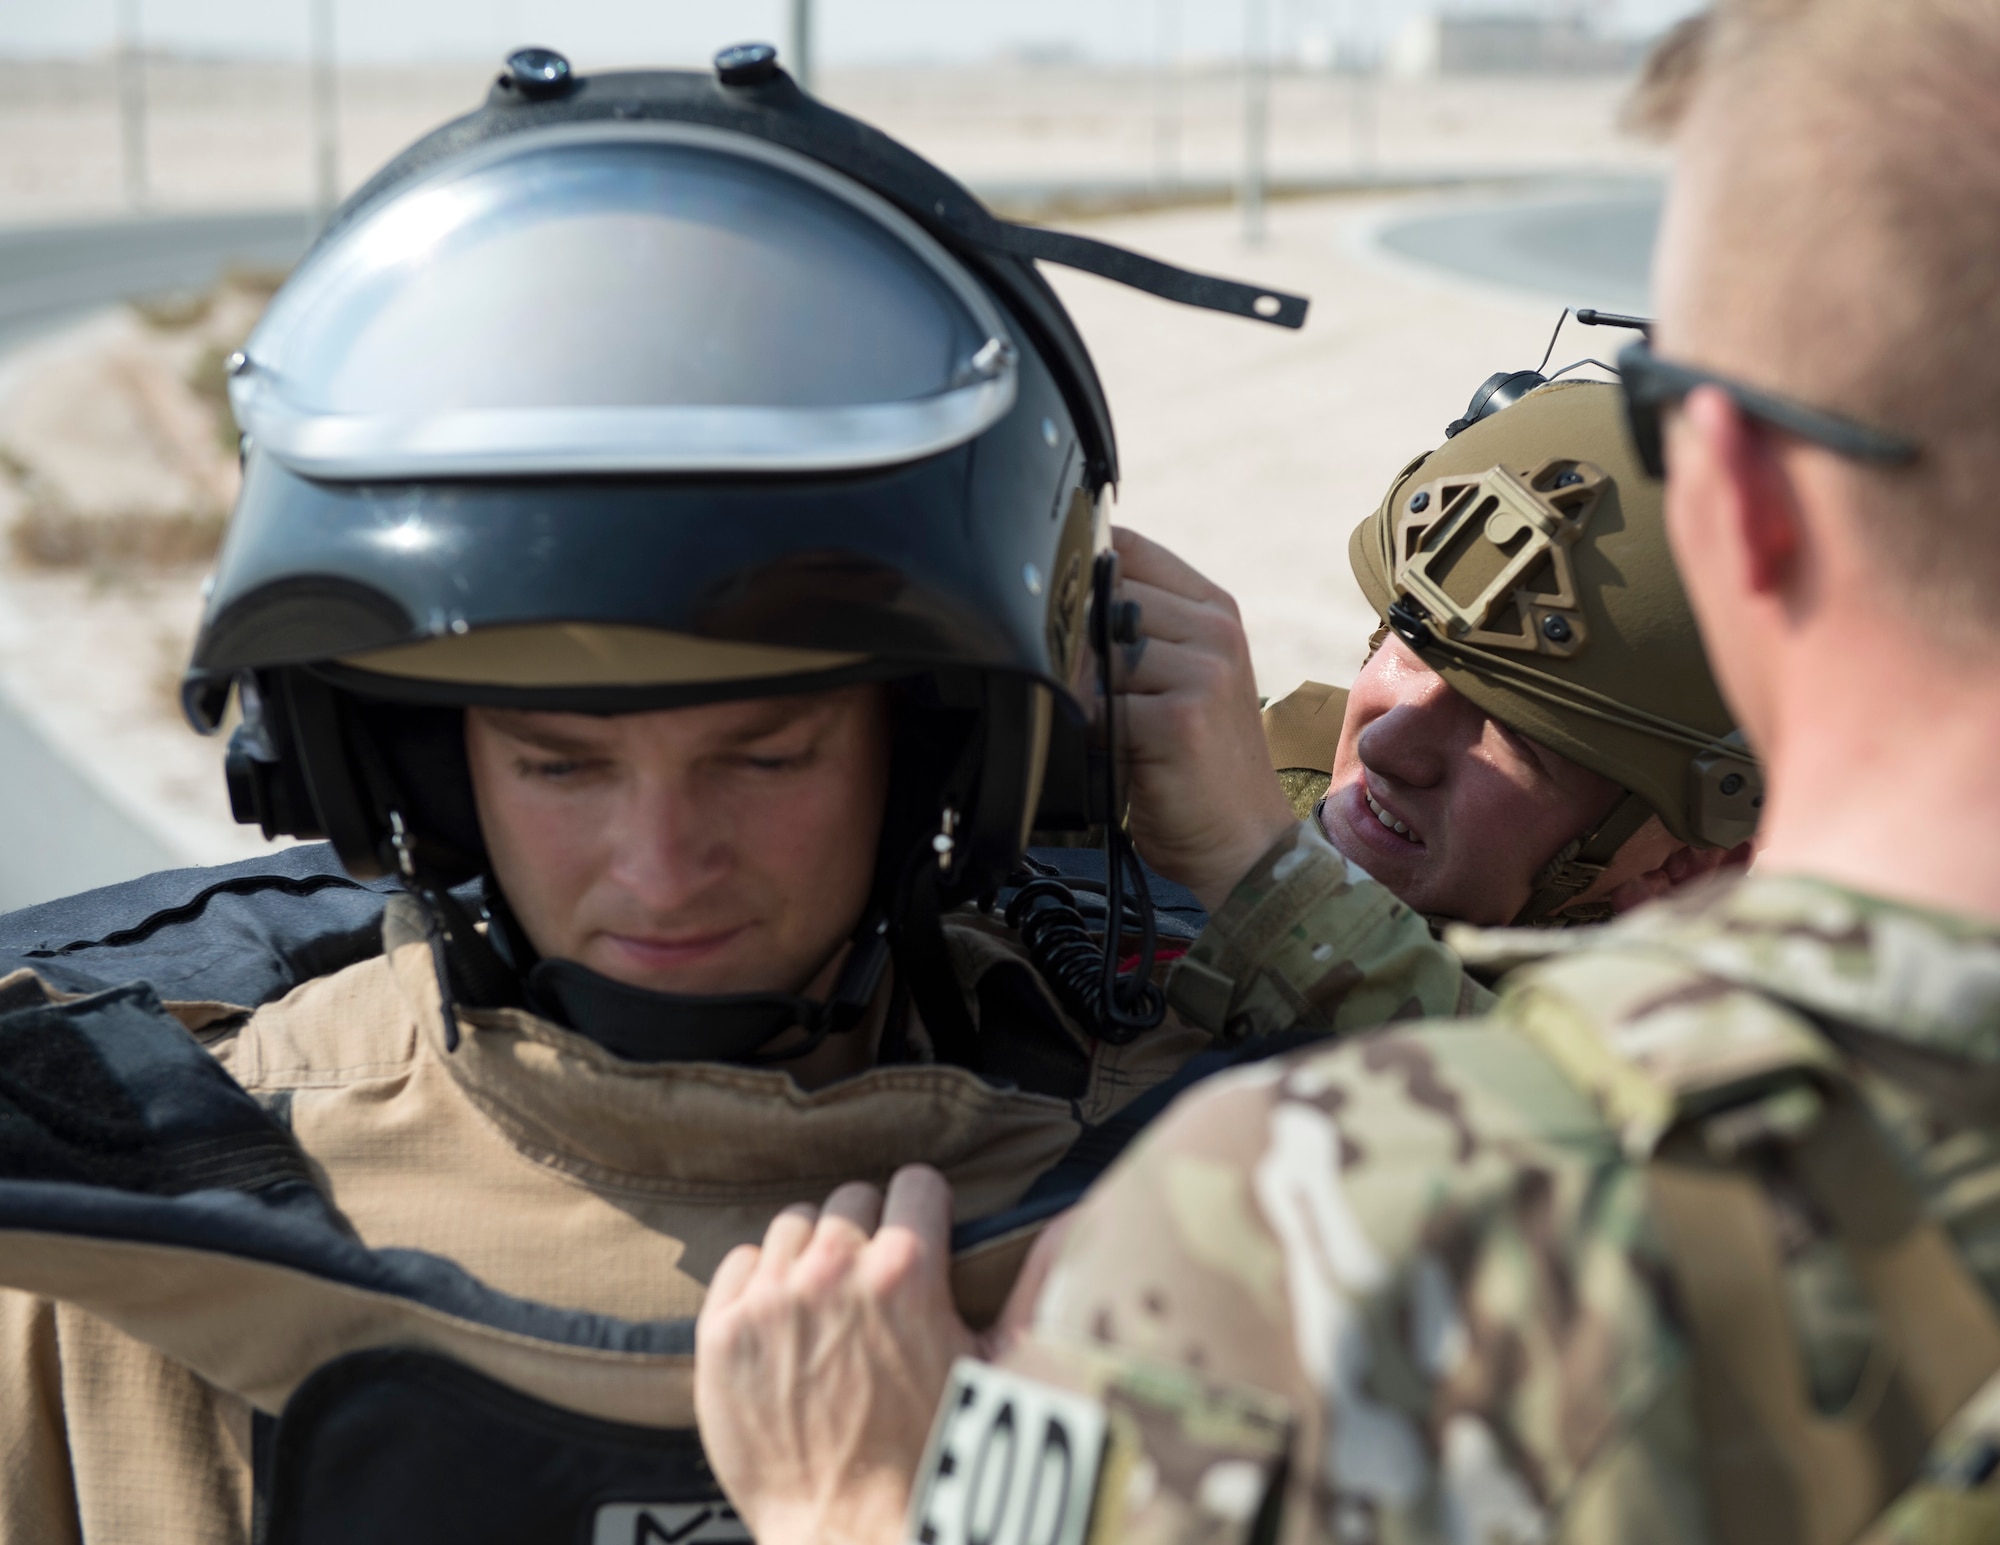 Staff Sgt. Weston Cobb, team member with the 379th Expeditionary Civil Engineer Squadron Explosive Ordnance Disposal Flight, back right, secures the helmet of Staff Sgt. Brian Vosper’s, team leader, at Al Udeid Air Base, Qatar, Aug. 26, 2017.